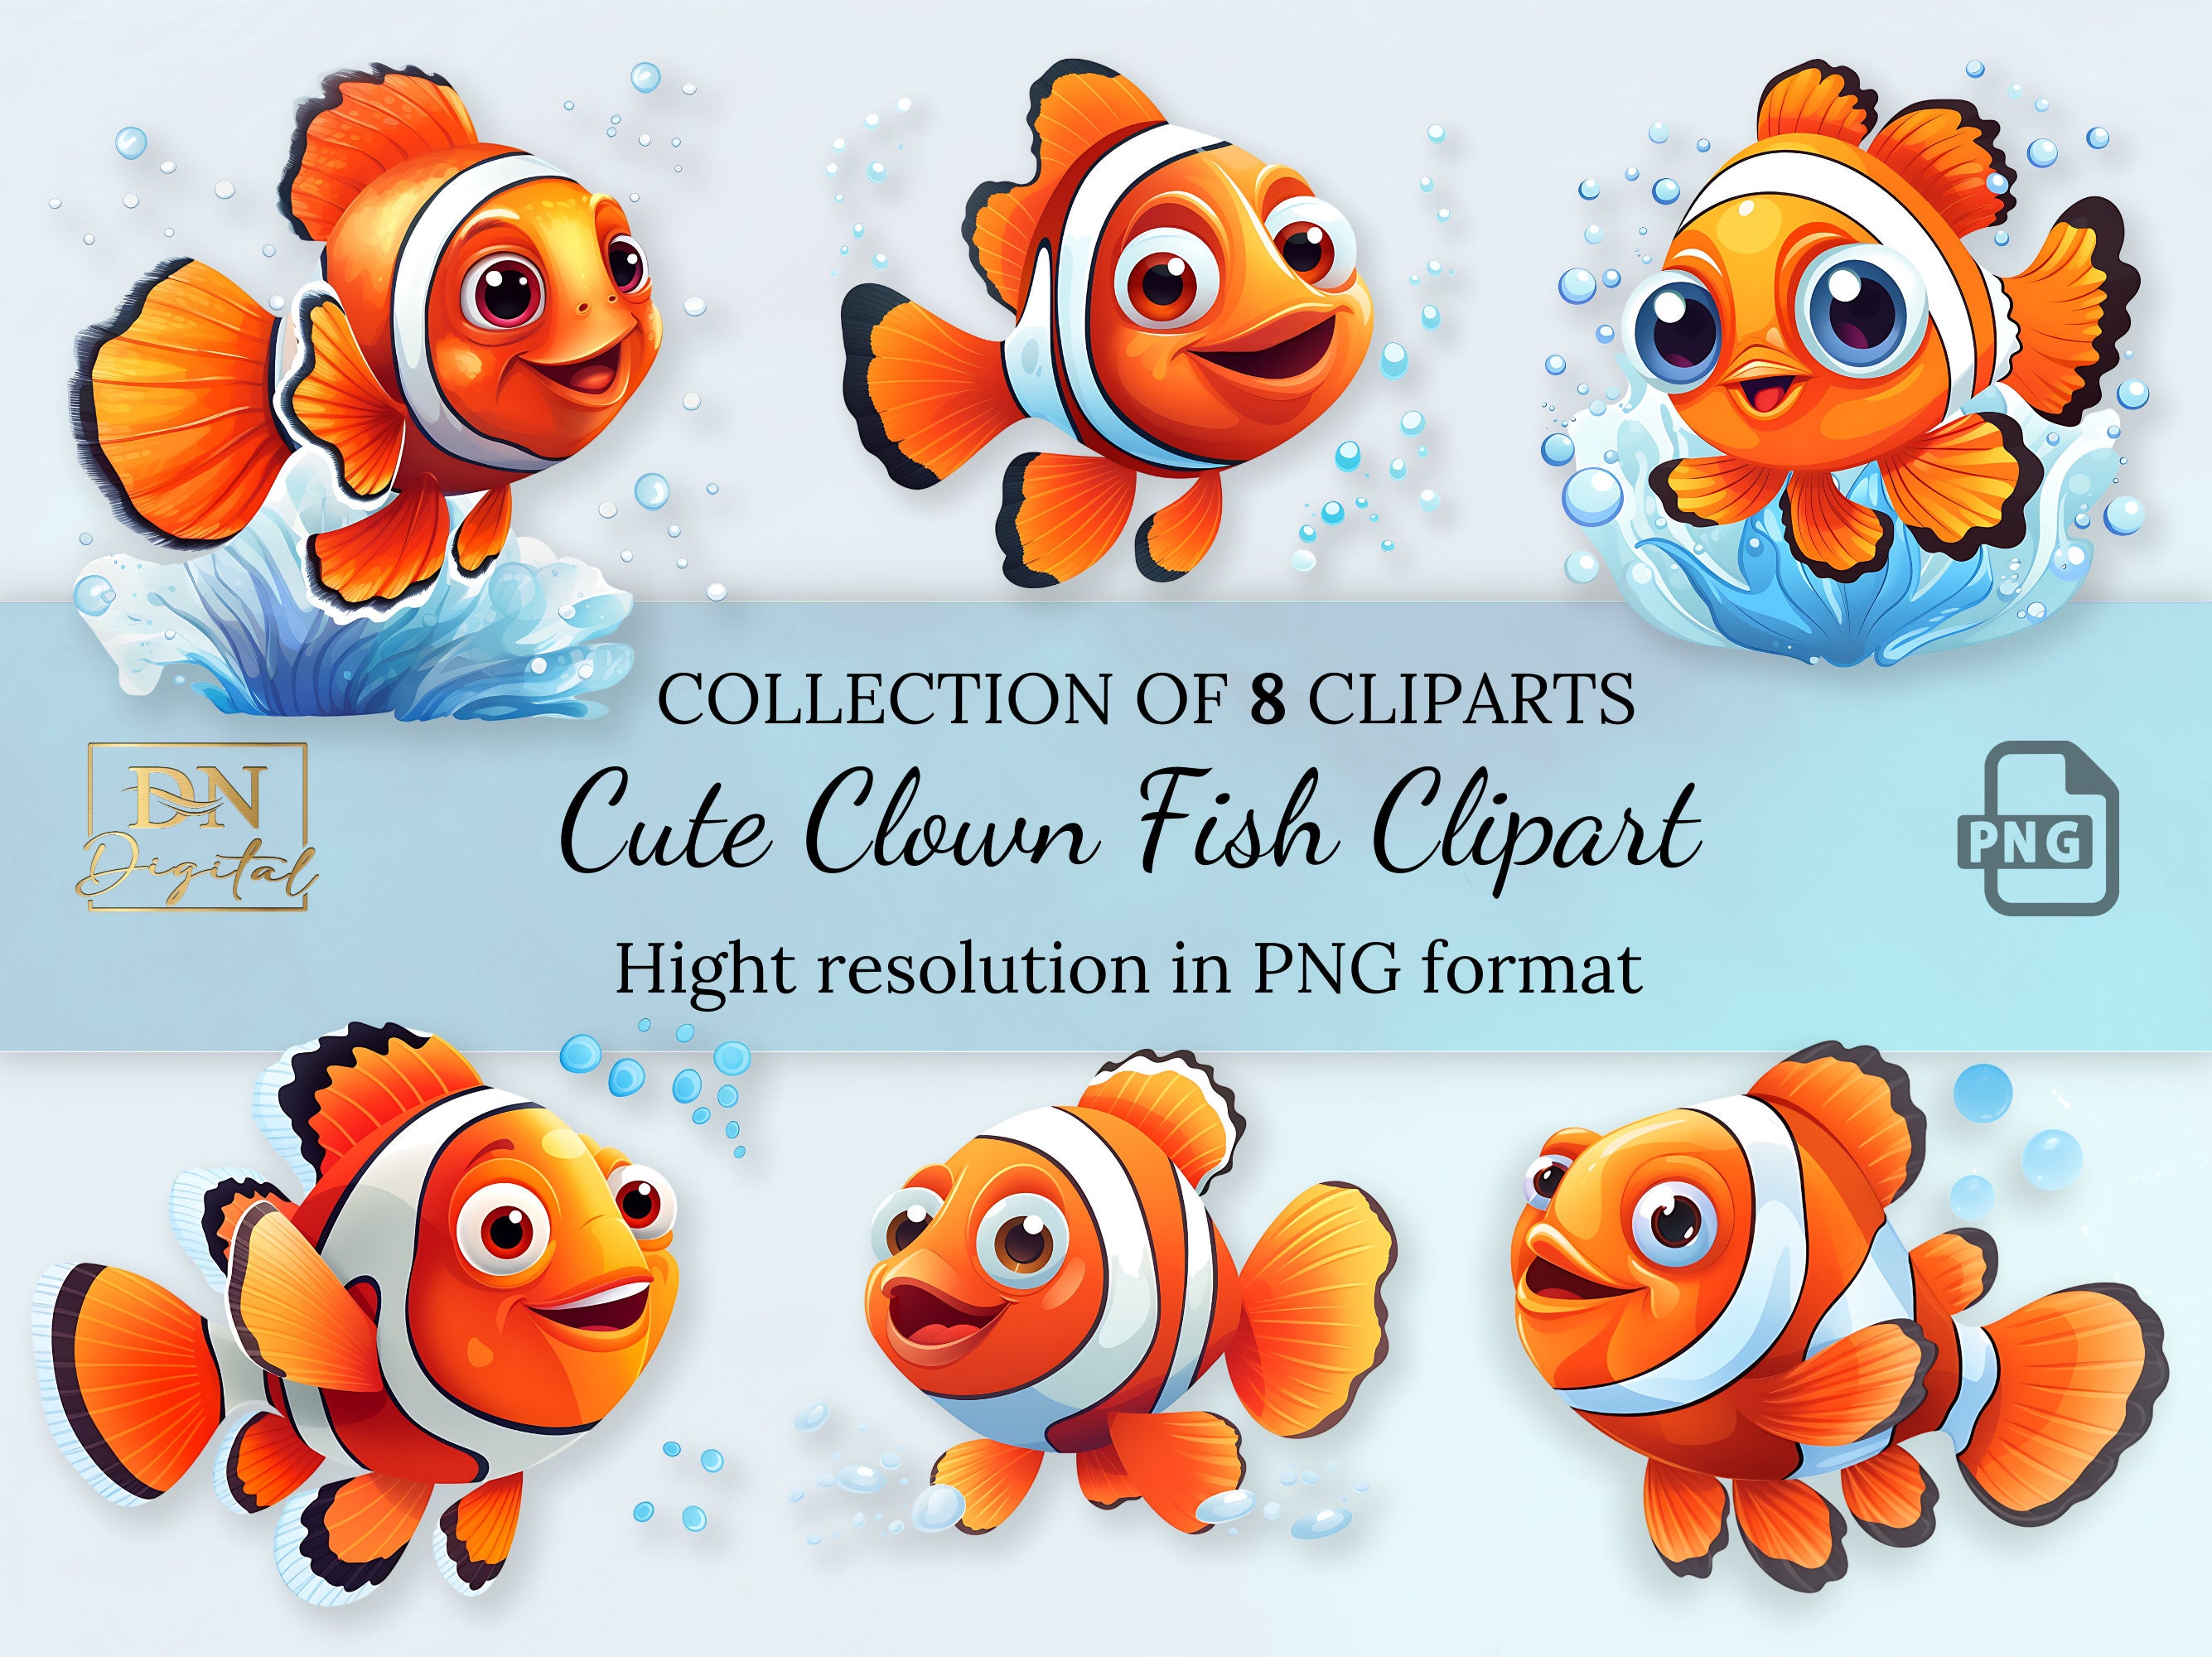 Cute Clown Fish Clipart Collection With Free Commercial License Clown Fish  Ilustrations Hight Resolution PNG Files 